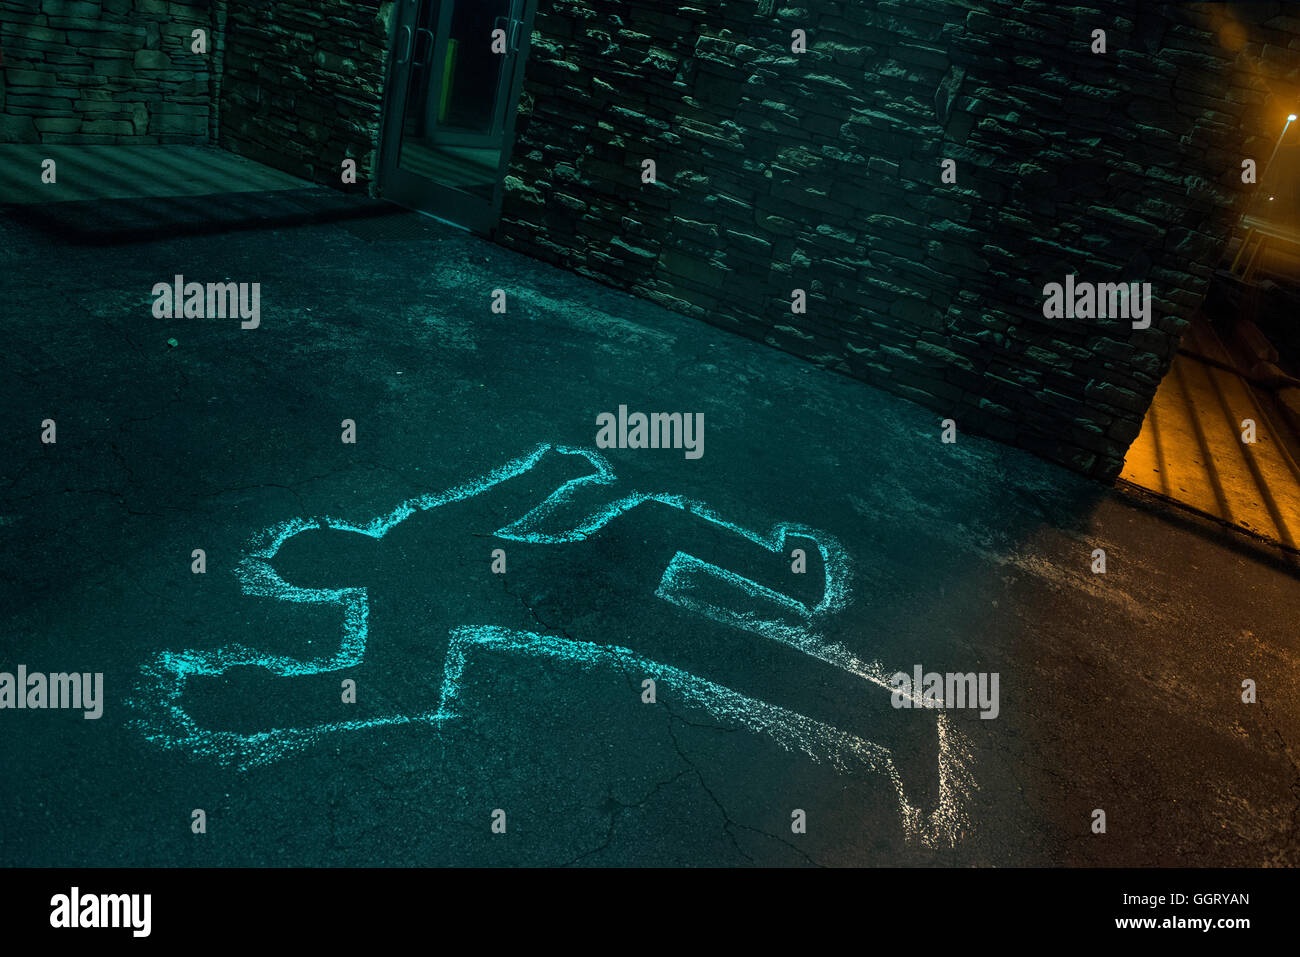 Chalk outline of body of victim on pavement Stock Photo